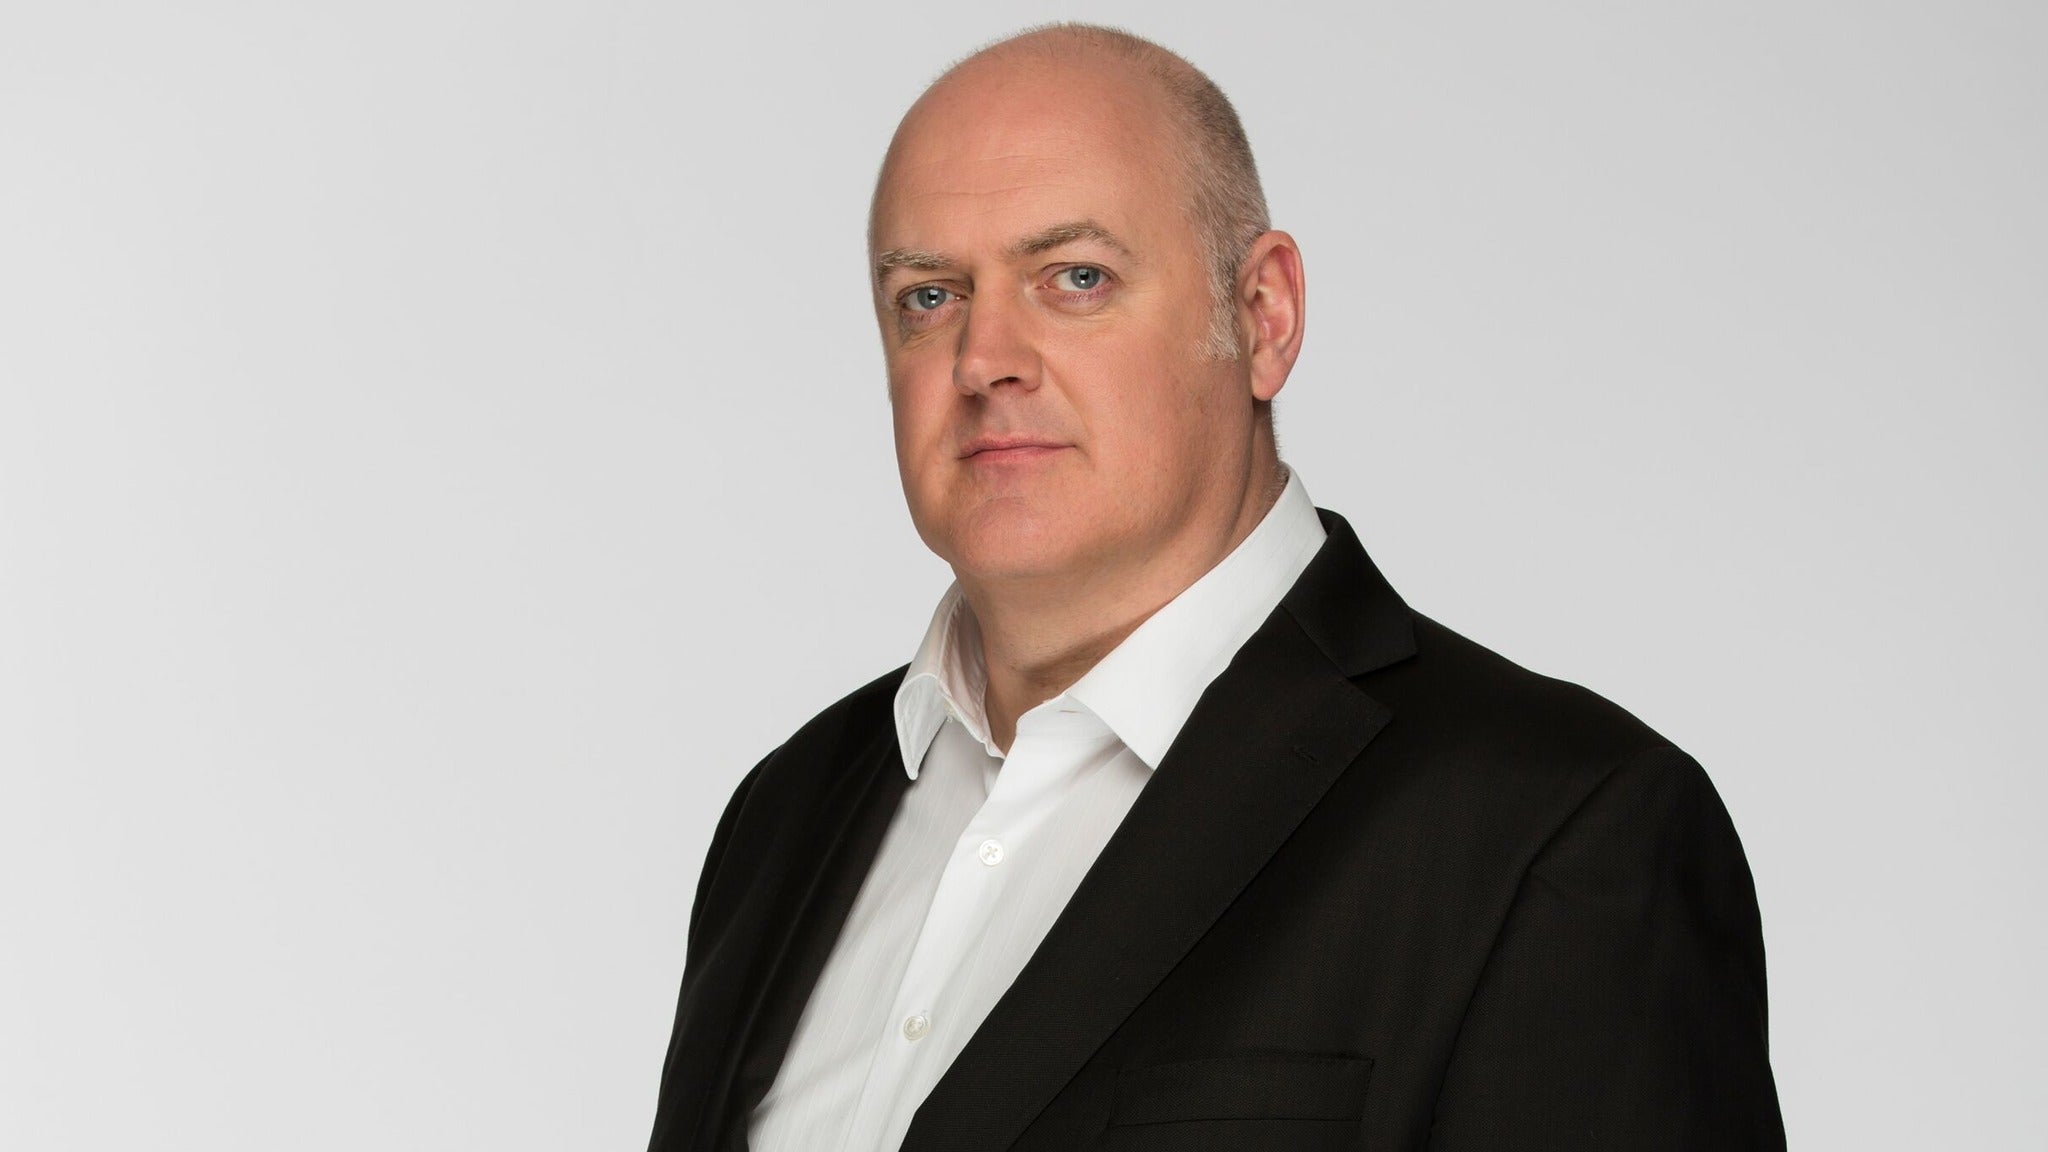 Dara O'Briain in Somerville promo photo for Exclusive presale offer code